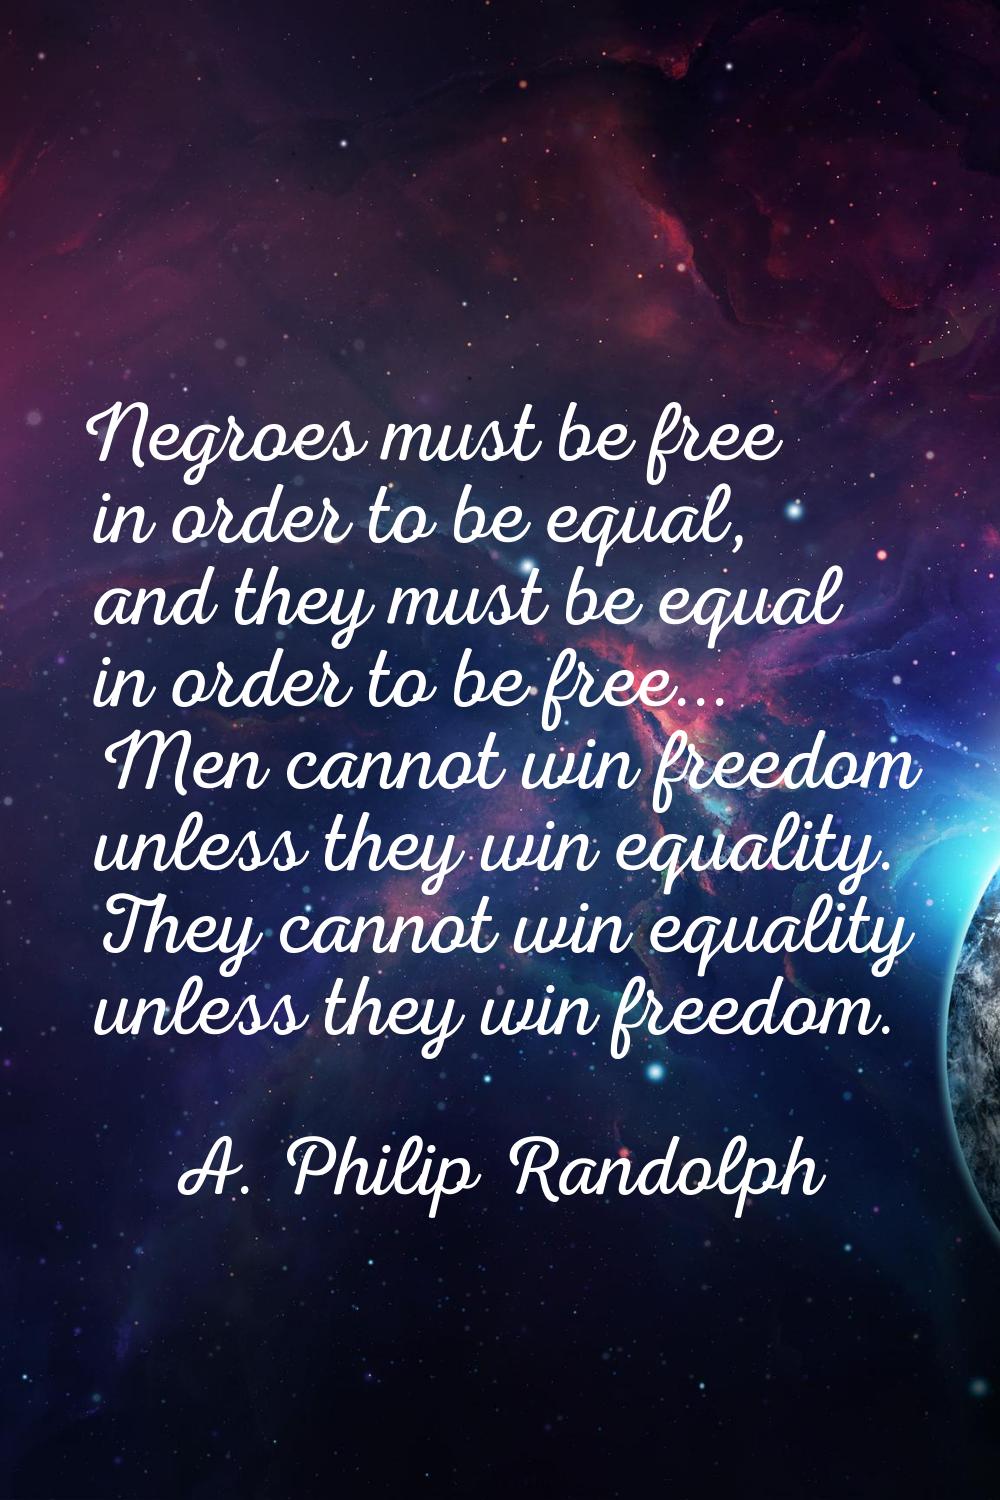 Negroes must be free in order to be equal, and they must be equal in order to be free... Men cannot